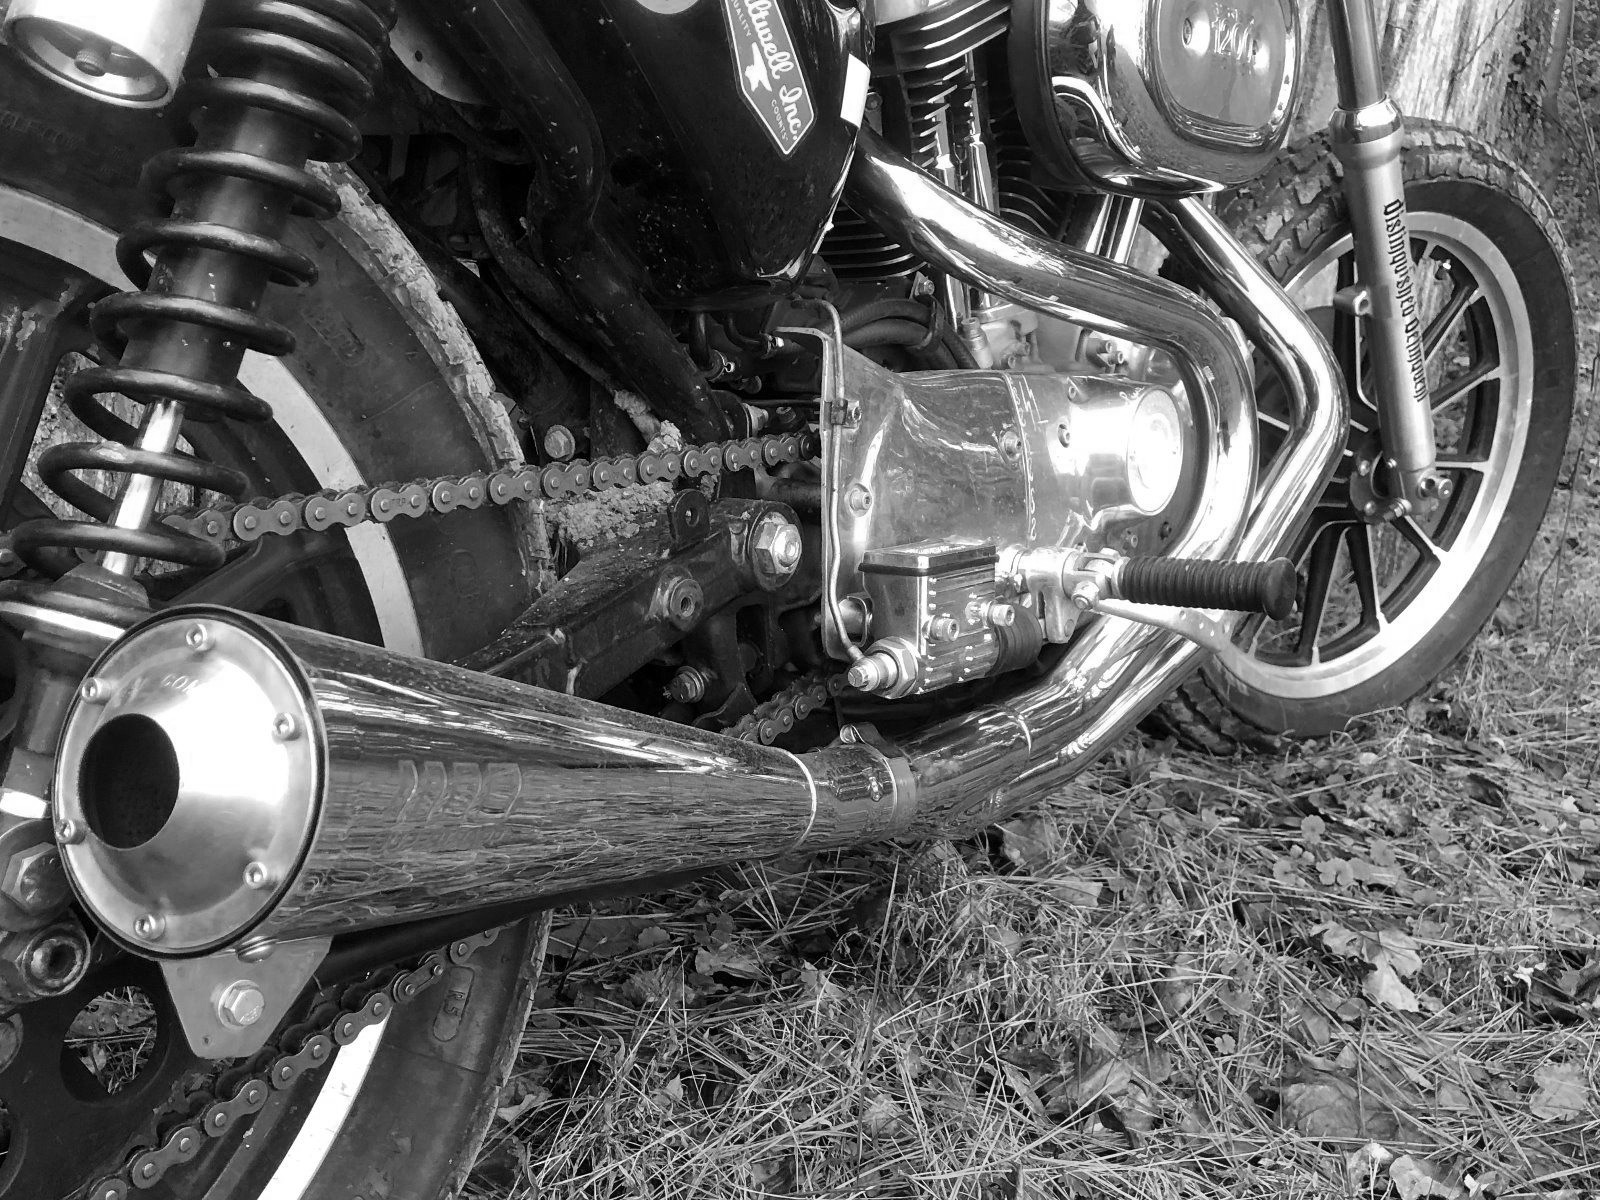 SuperTrapp Megaphone 2-in-1 exhaust stainless steel satin for Sportster